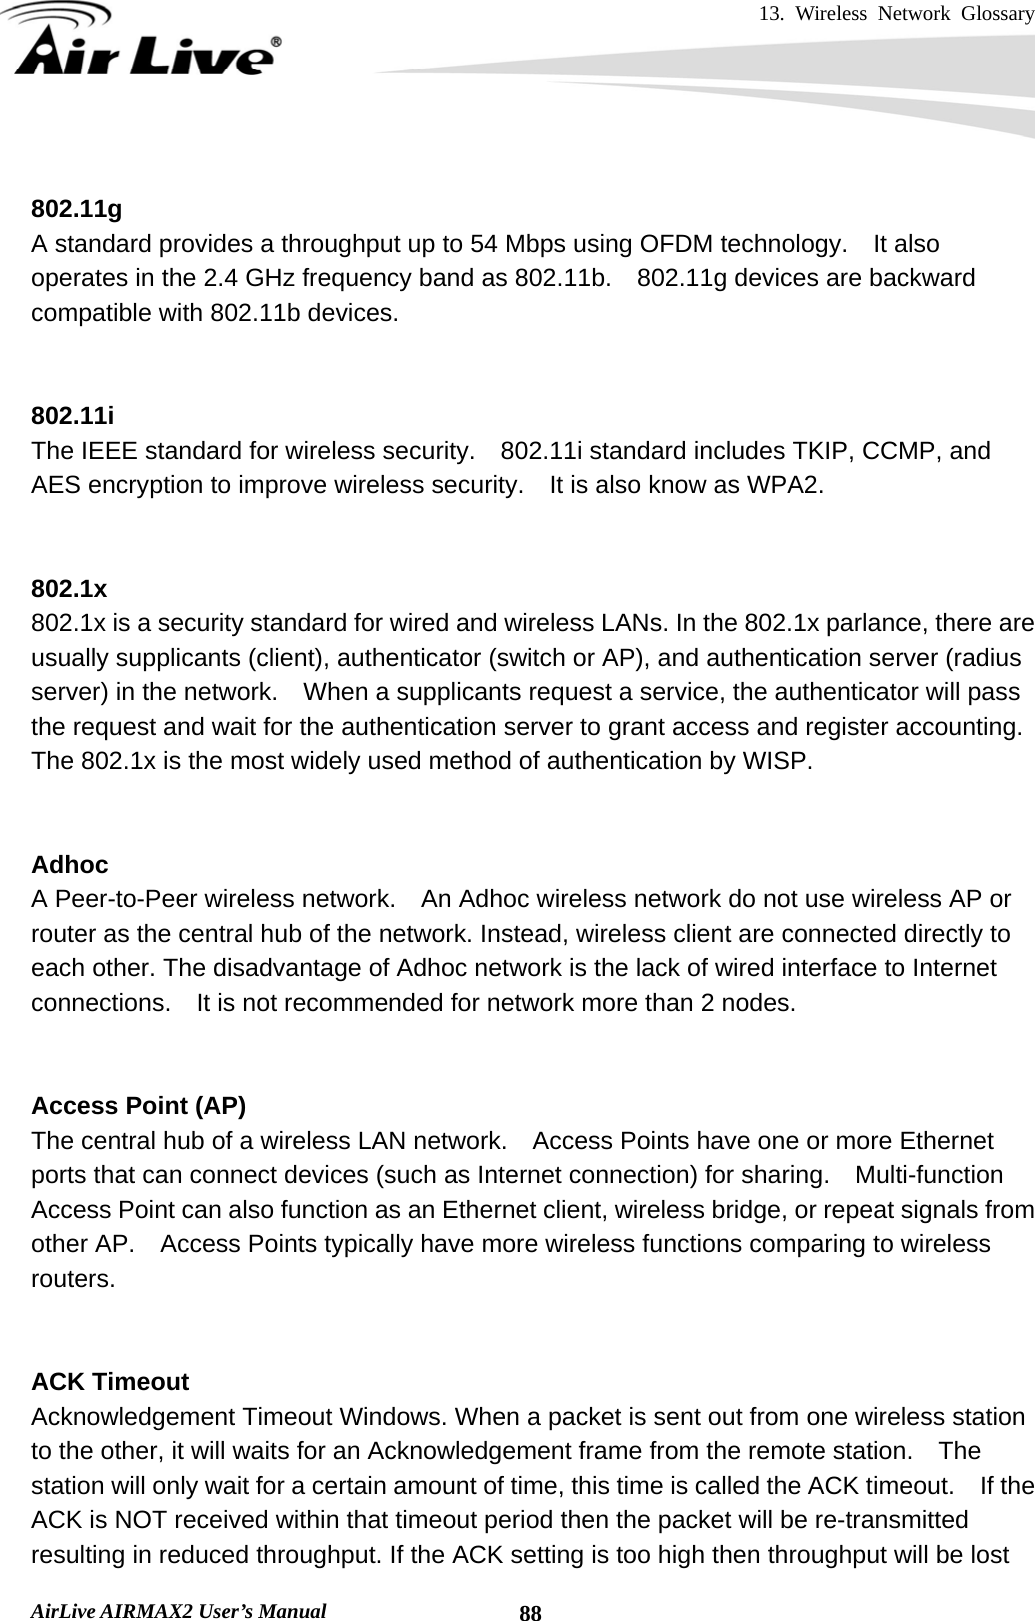 13. Wireless Network Glossary       AirLive AIRMAX2 User’s Manual  88 802.11g A standard provides a throughput up to 54 Mbps using OFDM technology.    It also operates in the 2.4 GHz frequency band as 802.11b.    802.11g devices are backward compatible with 802.11b devices.   802.11i The IEEE standard for wireless security.    802.11i standard includes TKIP, CCMP, and AES encryption to improve wireless security.    It is also know as WPA2.   802.1x 802.1x is a security standard for wired and wireless LANs. In the 802.1x parlance, there are usually supplicants (client), authenticator (switch or AP), and authentication server (radius server) in the network.    When a supplicants request a service, the authenticator will pass the request and wait for the authentication server to grant access and register accounting.   The 802.1x is the most widely used method of authentication by WISP.   Adhoc A Peer-to-Peer wireless network.    An Adhoc wireless network do not use wireless AP or router as the central hub of the network. Instead, wireless client are connected directly to each other. The disadvantage of Adhoc network is the lack of wired interface to Internet connections.    It is not recommended for network more than 2 nodes.   Access Point (AP) The central hub of a wireless LAN network.    Access Points have one or more Ethernet ports that can connect devices (such as Internet connection) for sharing.    Multi-function Access Point can also function as an Ethernet client, wireless bridge, or repeat signals from other AP.    Access Points typically have more wireless functions comparing to wireless routers.   ACK Timeout Acknowledgement Timeout Windows. When a packet is sent out from one wireless station to the other, it will waits for an Acknowledgement frame from the remote station.  The station will only wait for a certain amount of time, this time is called the ACK timeout.    If the ACK is NOT received within that timeout period then the packet will be re-transmitted resulting in reduced throughput. If the ACK setting is too high then throughput will be lost 